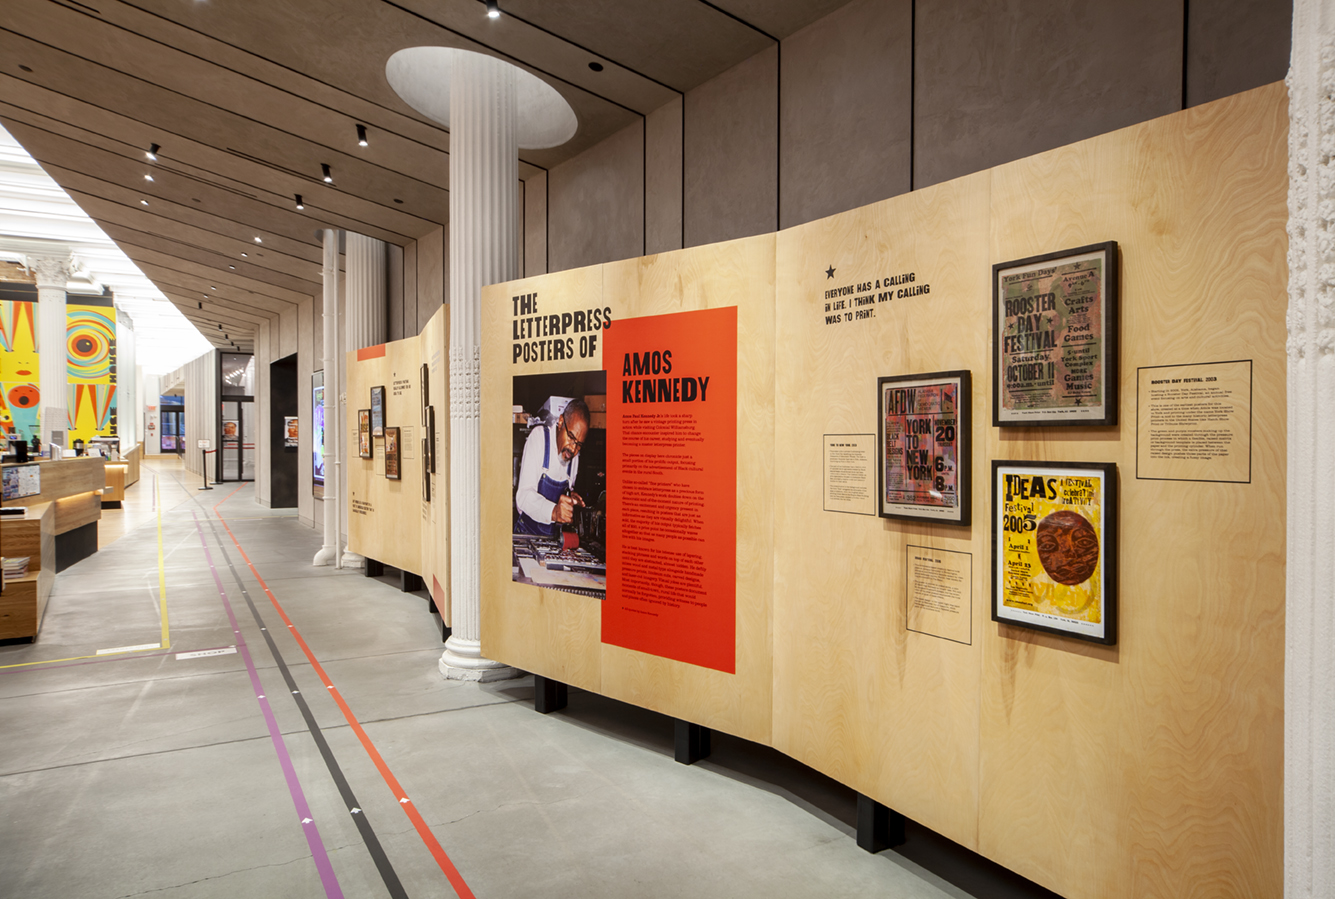 Plywood freestanding walls showcasing letterpress posters and an inlaid photo of Amos Kennedy.